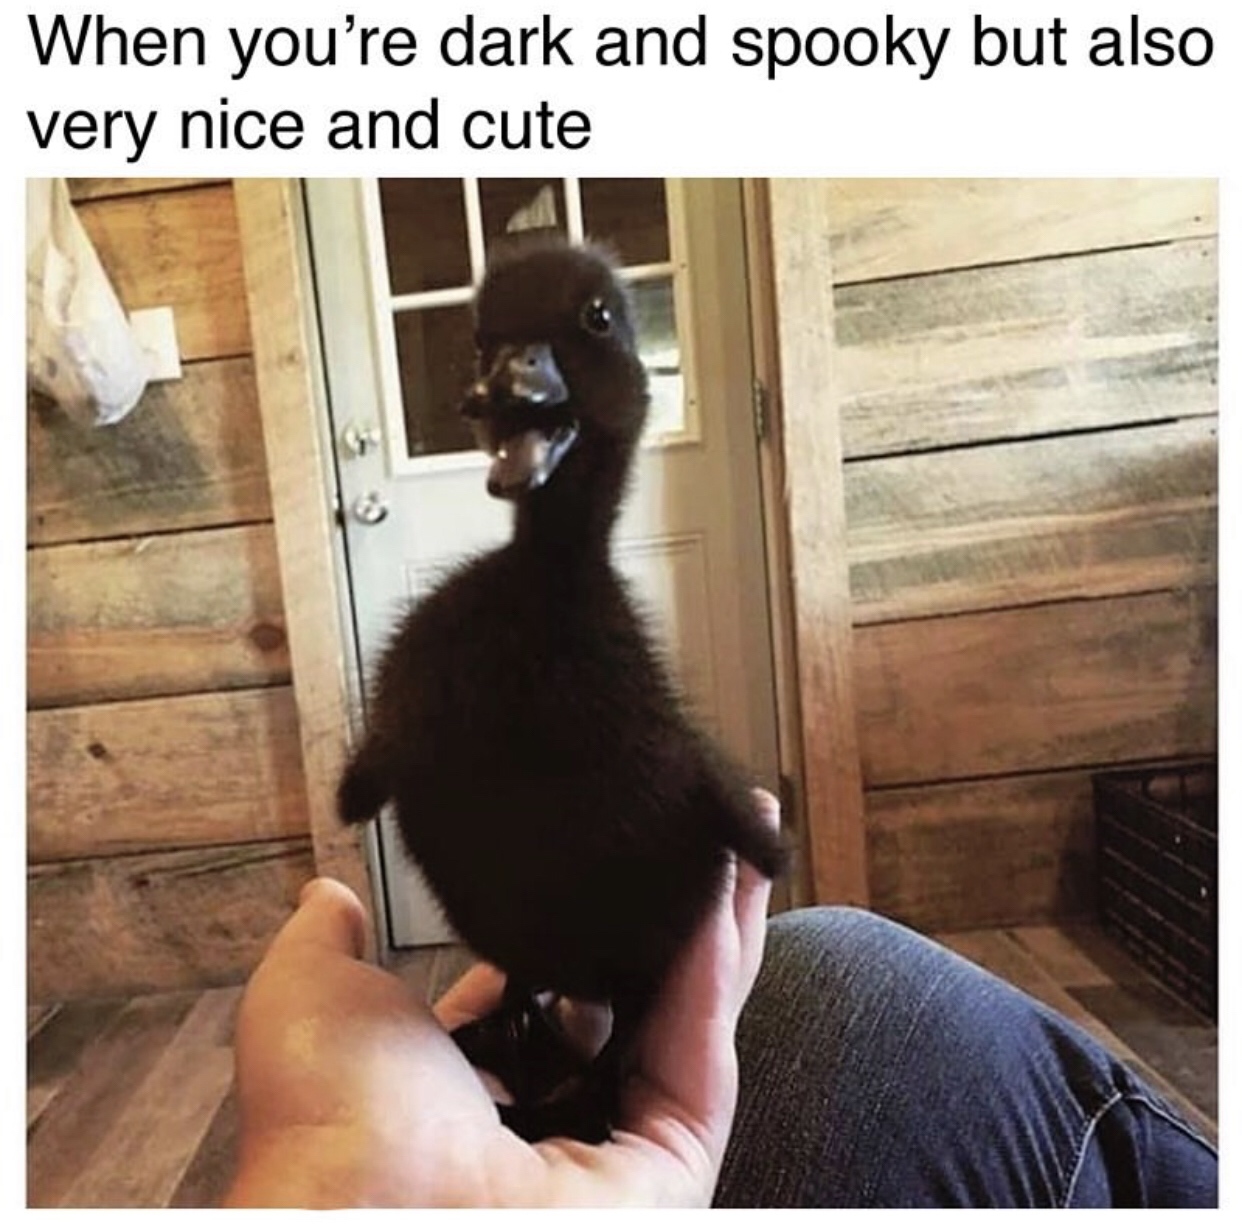 you re dark and spooky but also very nice and cute - When you're dark and spooky but also very nice and cute